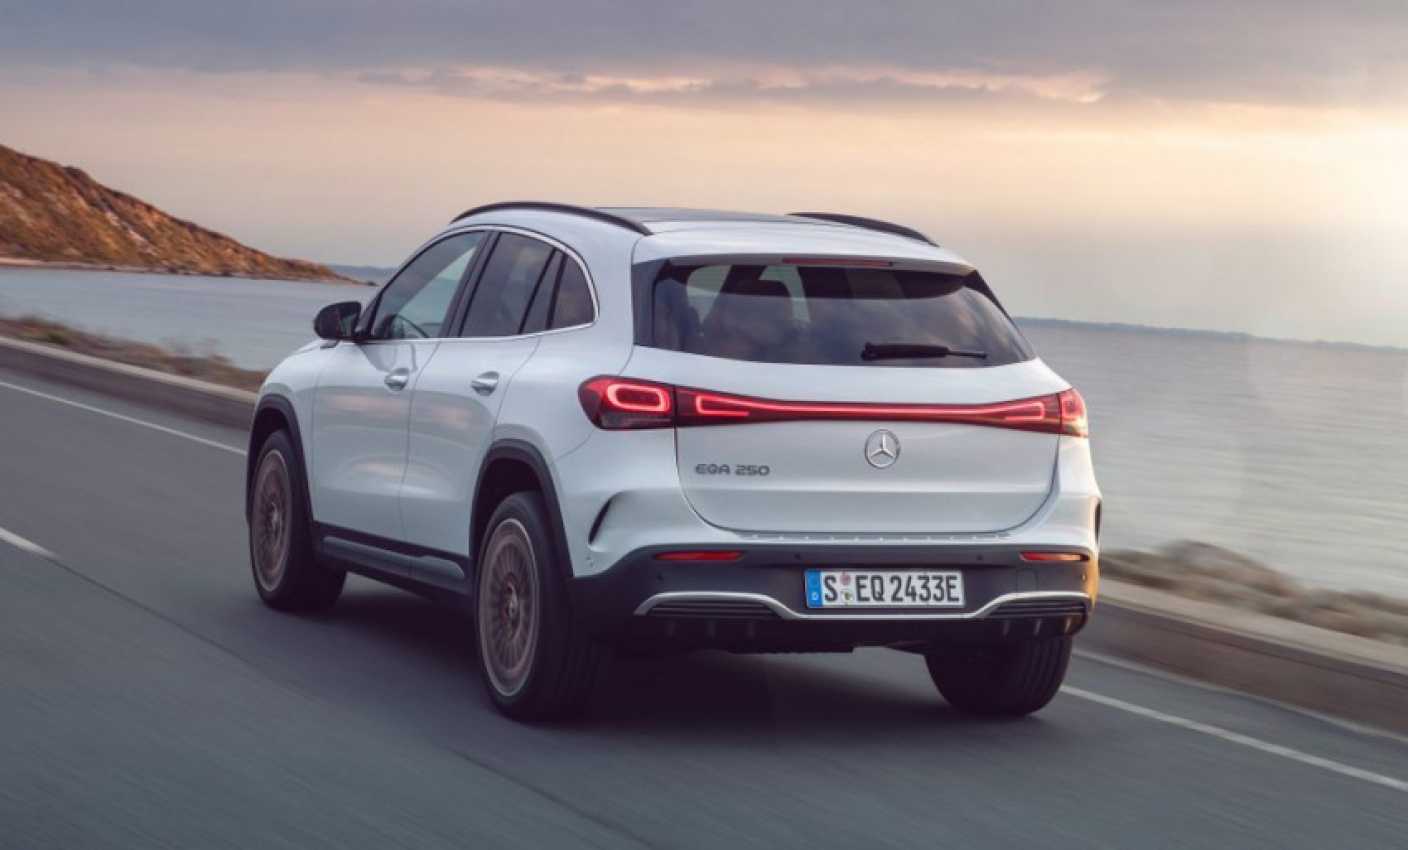 autos, cars, mercedes-benz, reviews, insights, mercedes, mercedes-benz eqa, mercedes-benz gla, price, the mercedes-benz eqa shows how cheap bevs have become